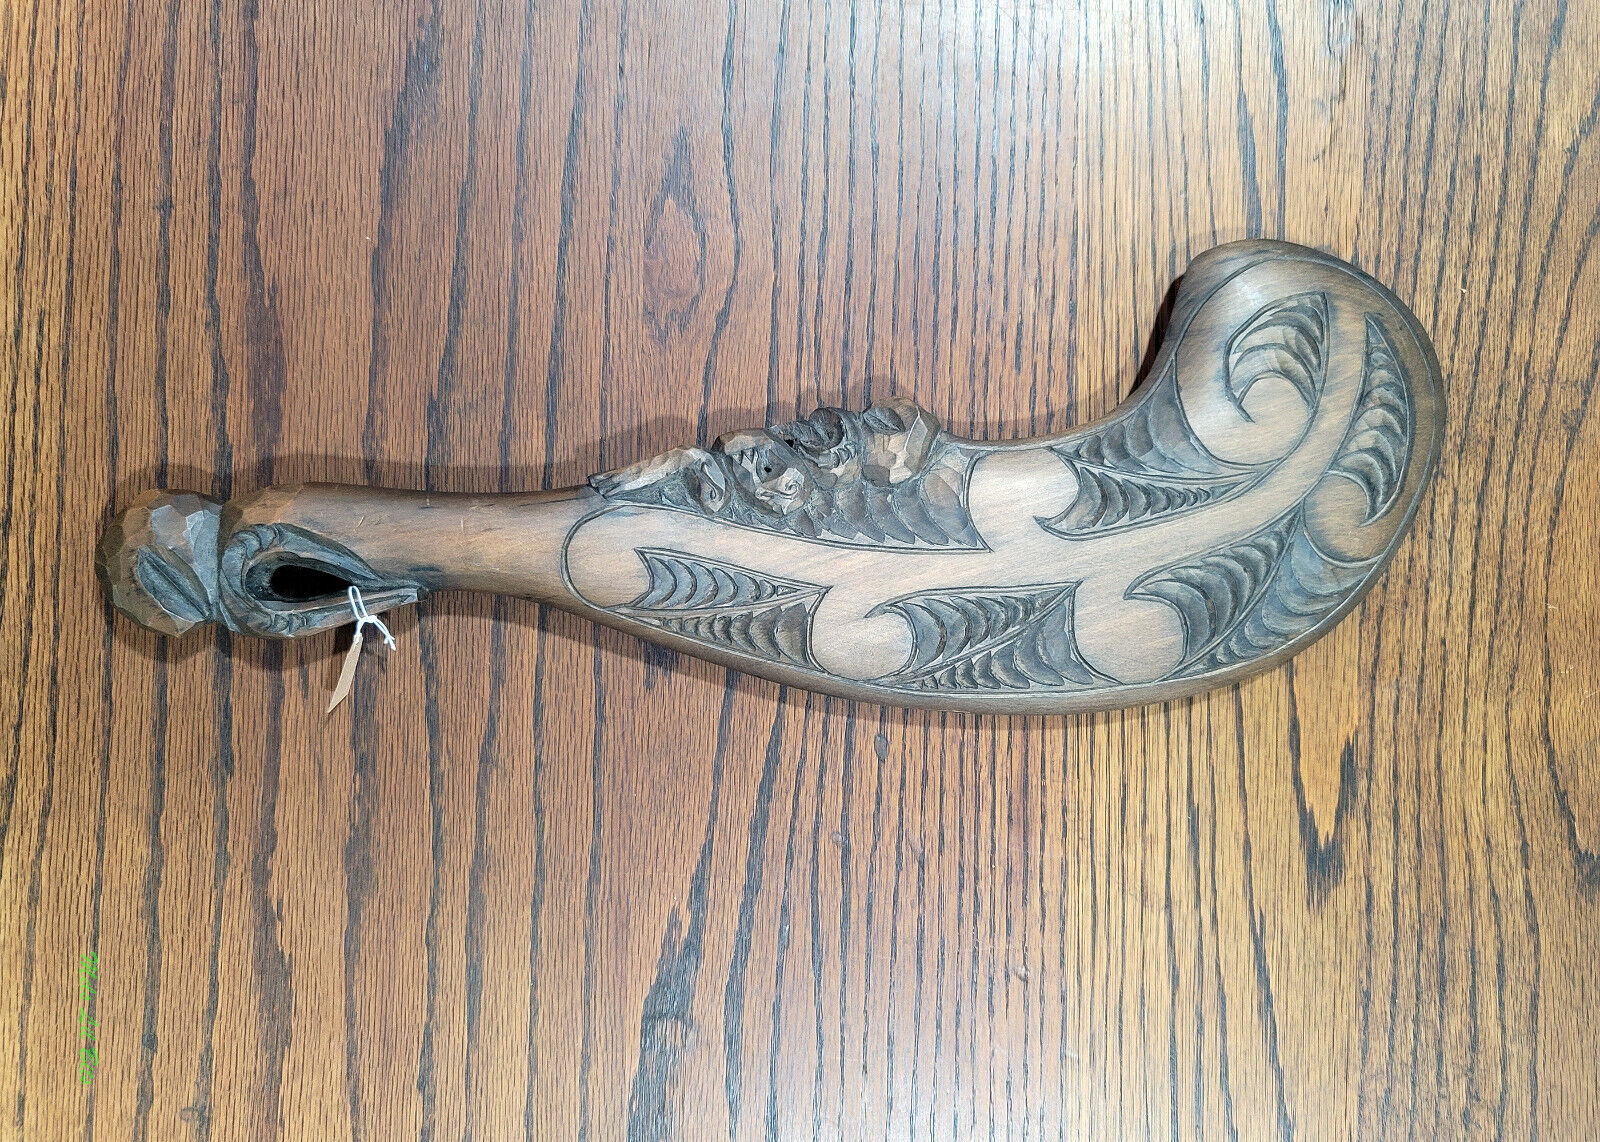 Maori Traditional Carved Wooden Wahaika